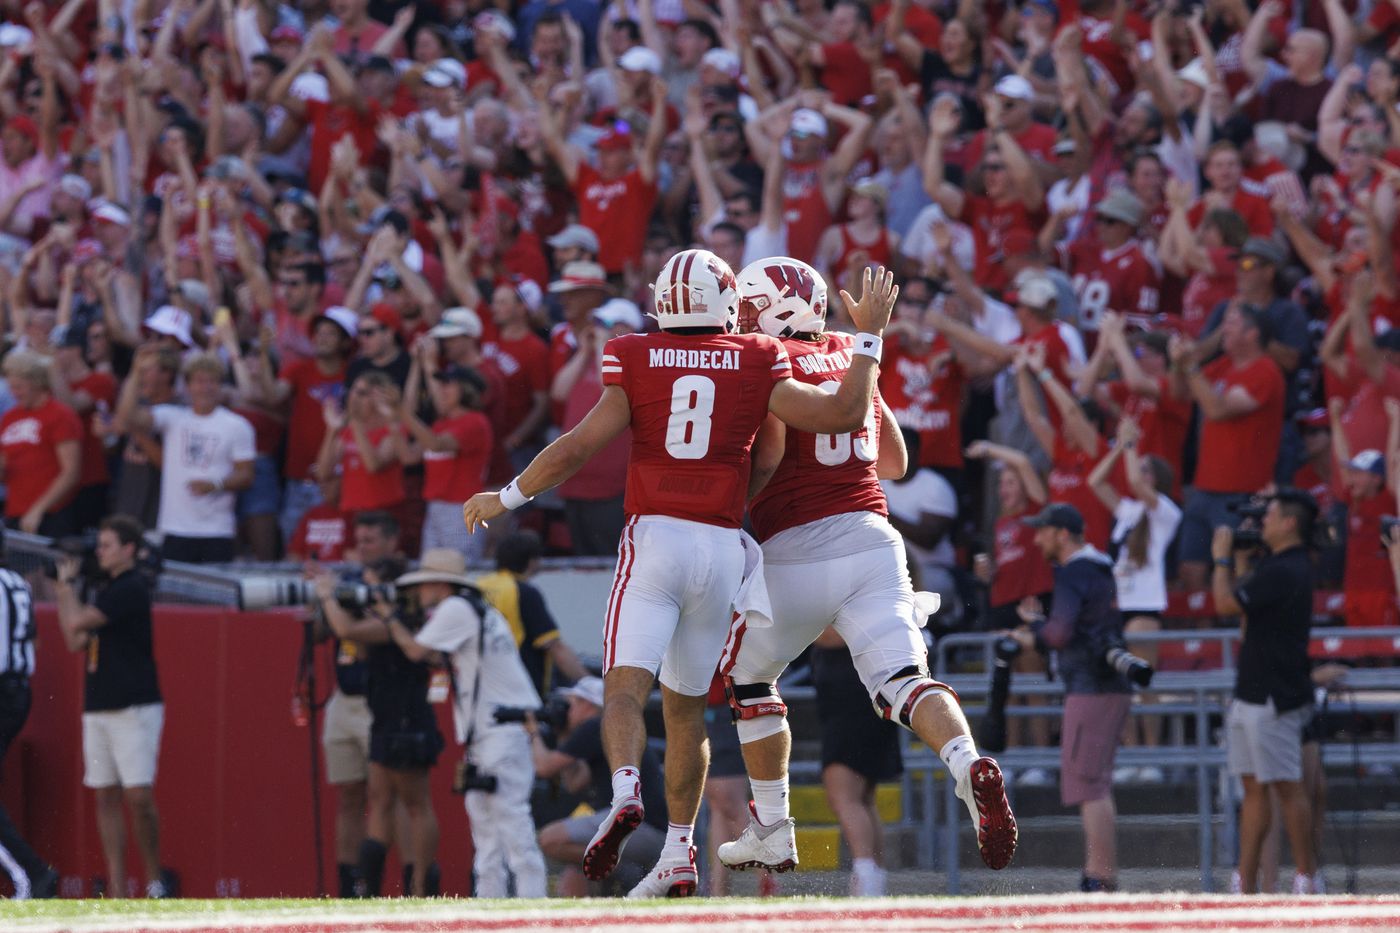 Three takeaways from the No. 19 Badgers’ 38-17 win over Buffalo